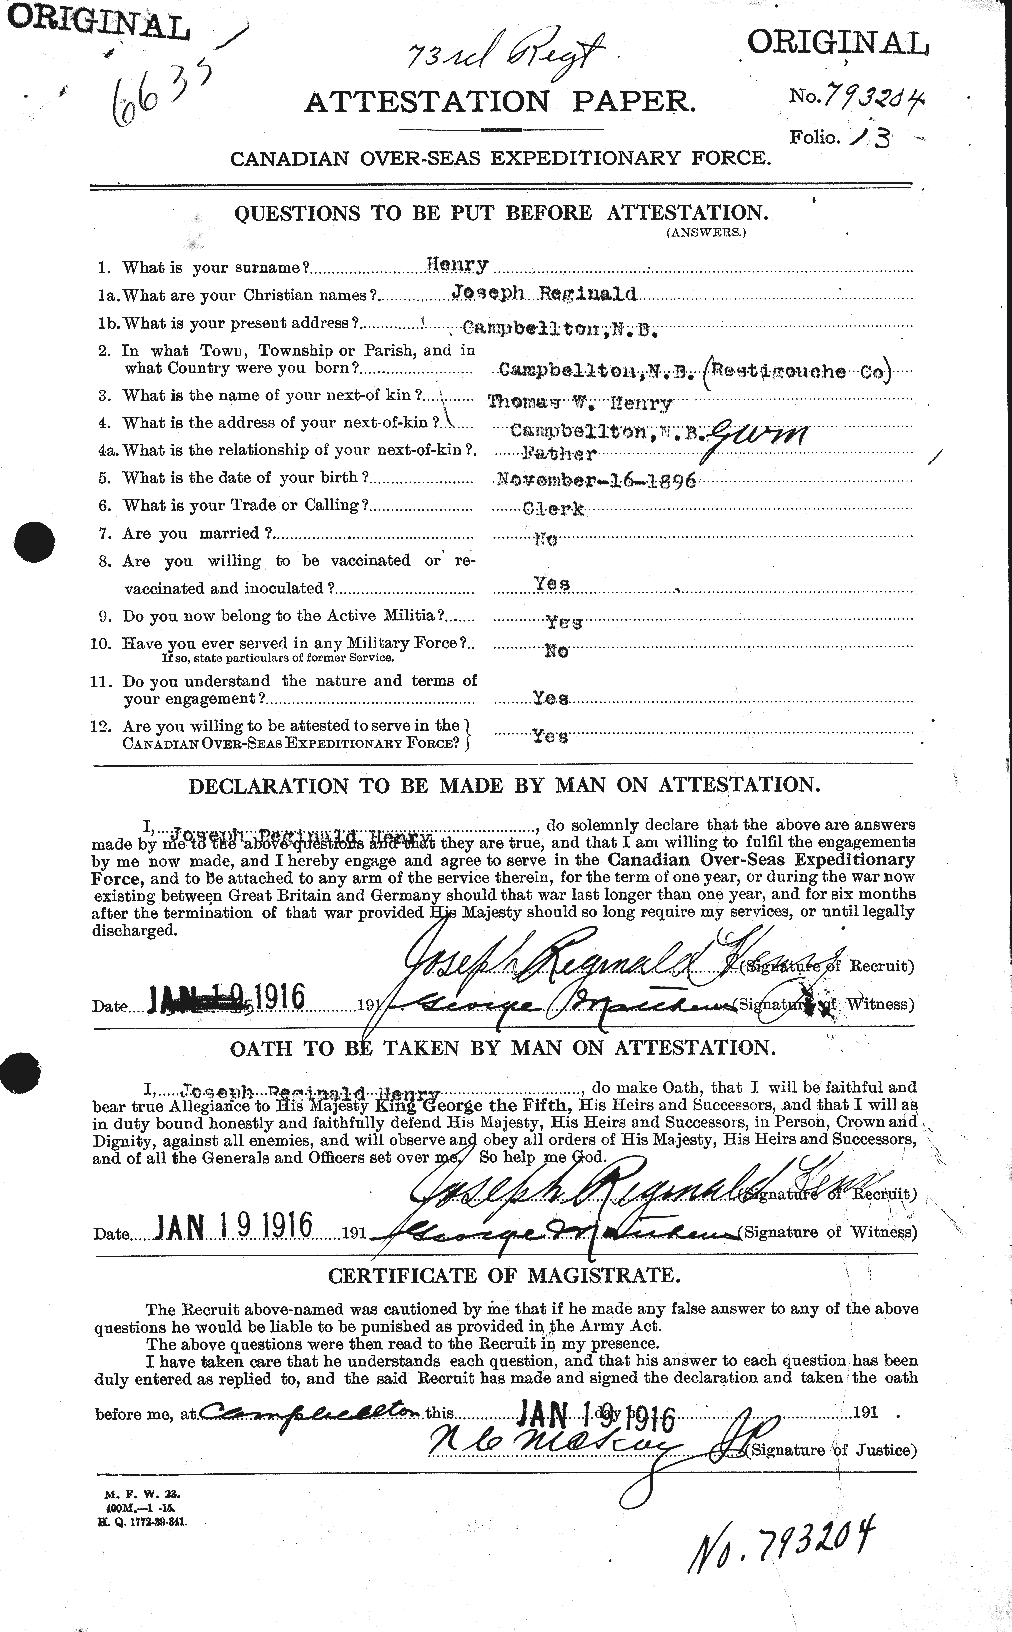 Personnel Records of the First World War - CEF 387649a